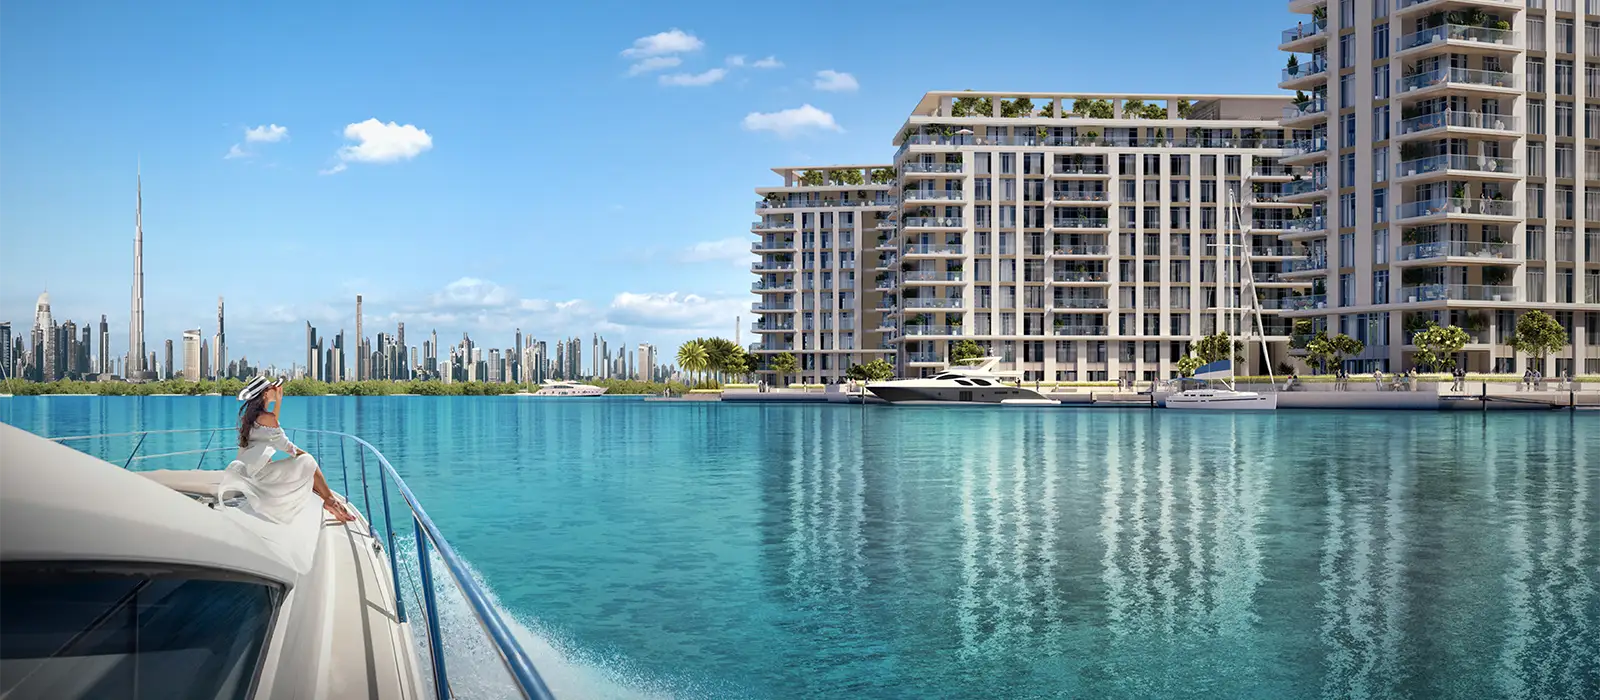 Luxury Residences at The Cove II